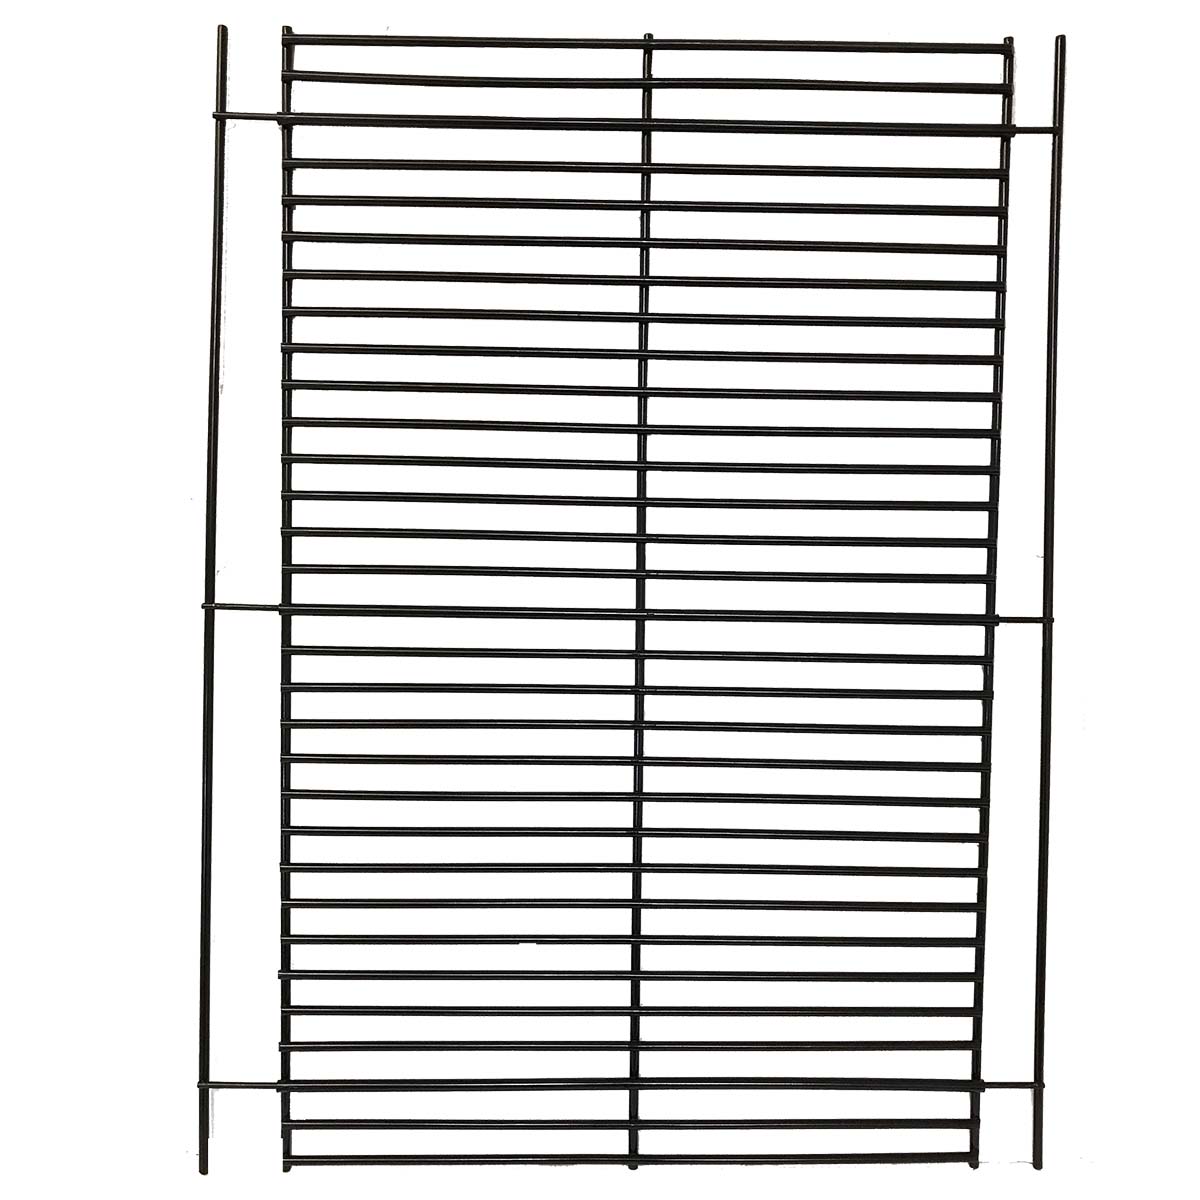 Picture of 21 Century B20A1 Porcelain Coated Grid - Medium